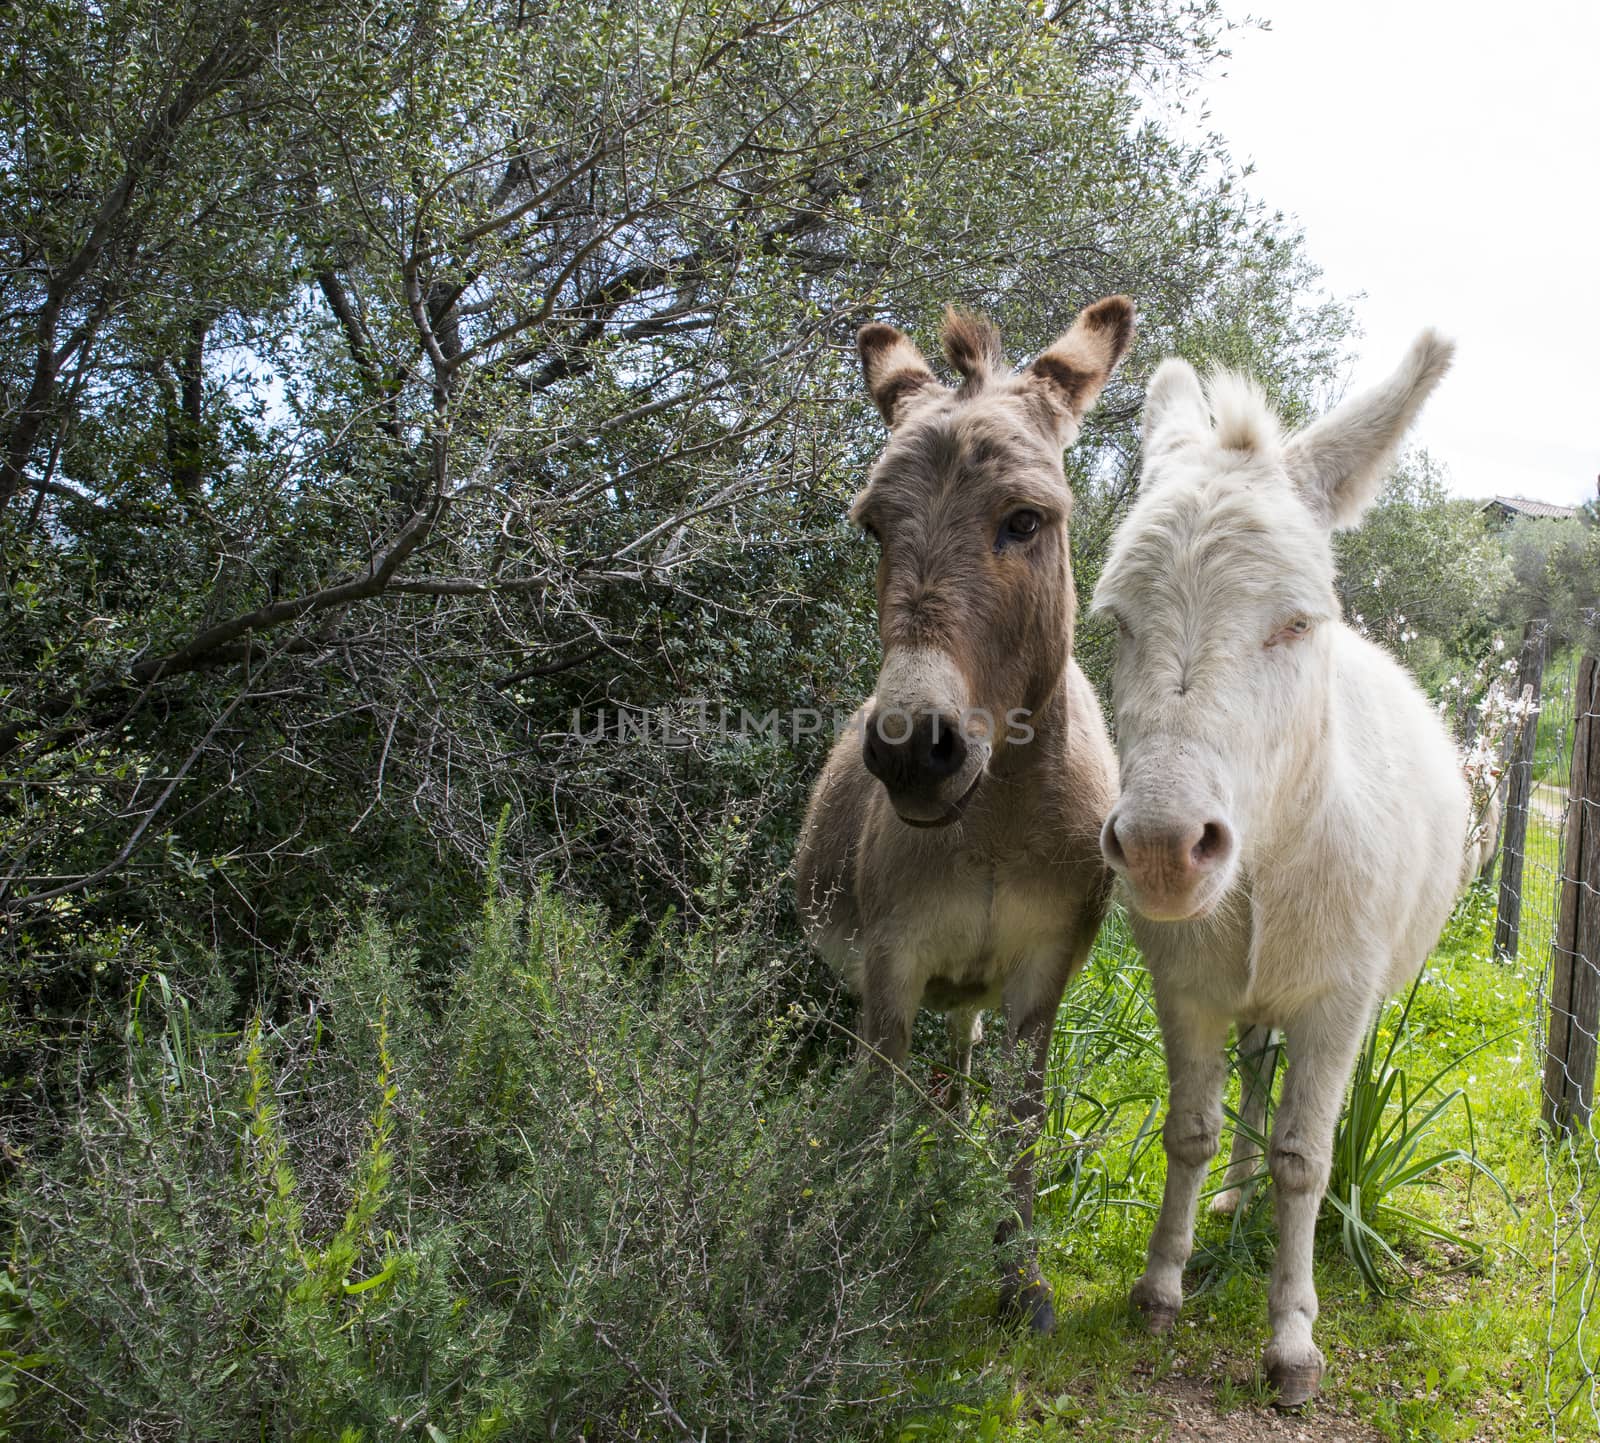 brown and white donkey together by compuinfoto